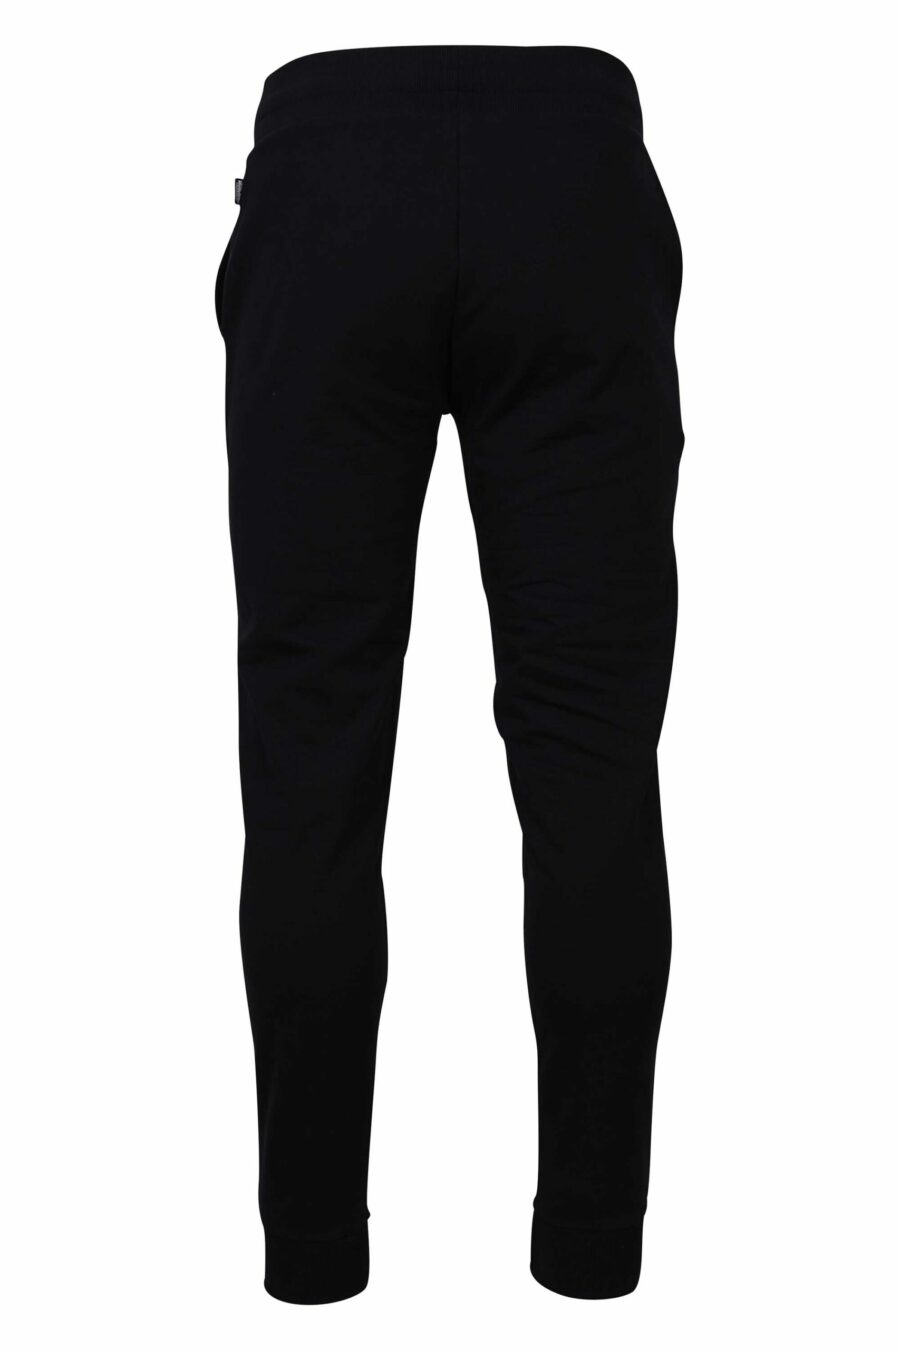 Tracksuit bottoms black with "underbear" bear logo patch - 667113019949 2 scaled